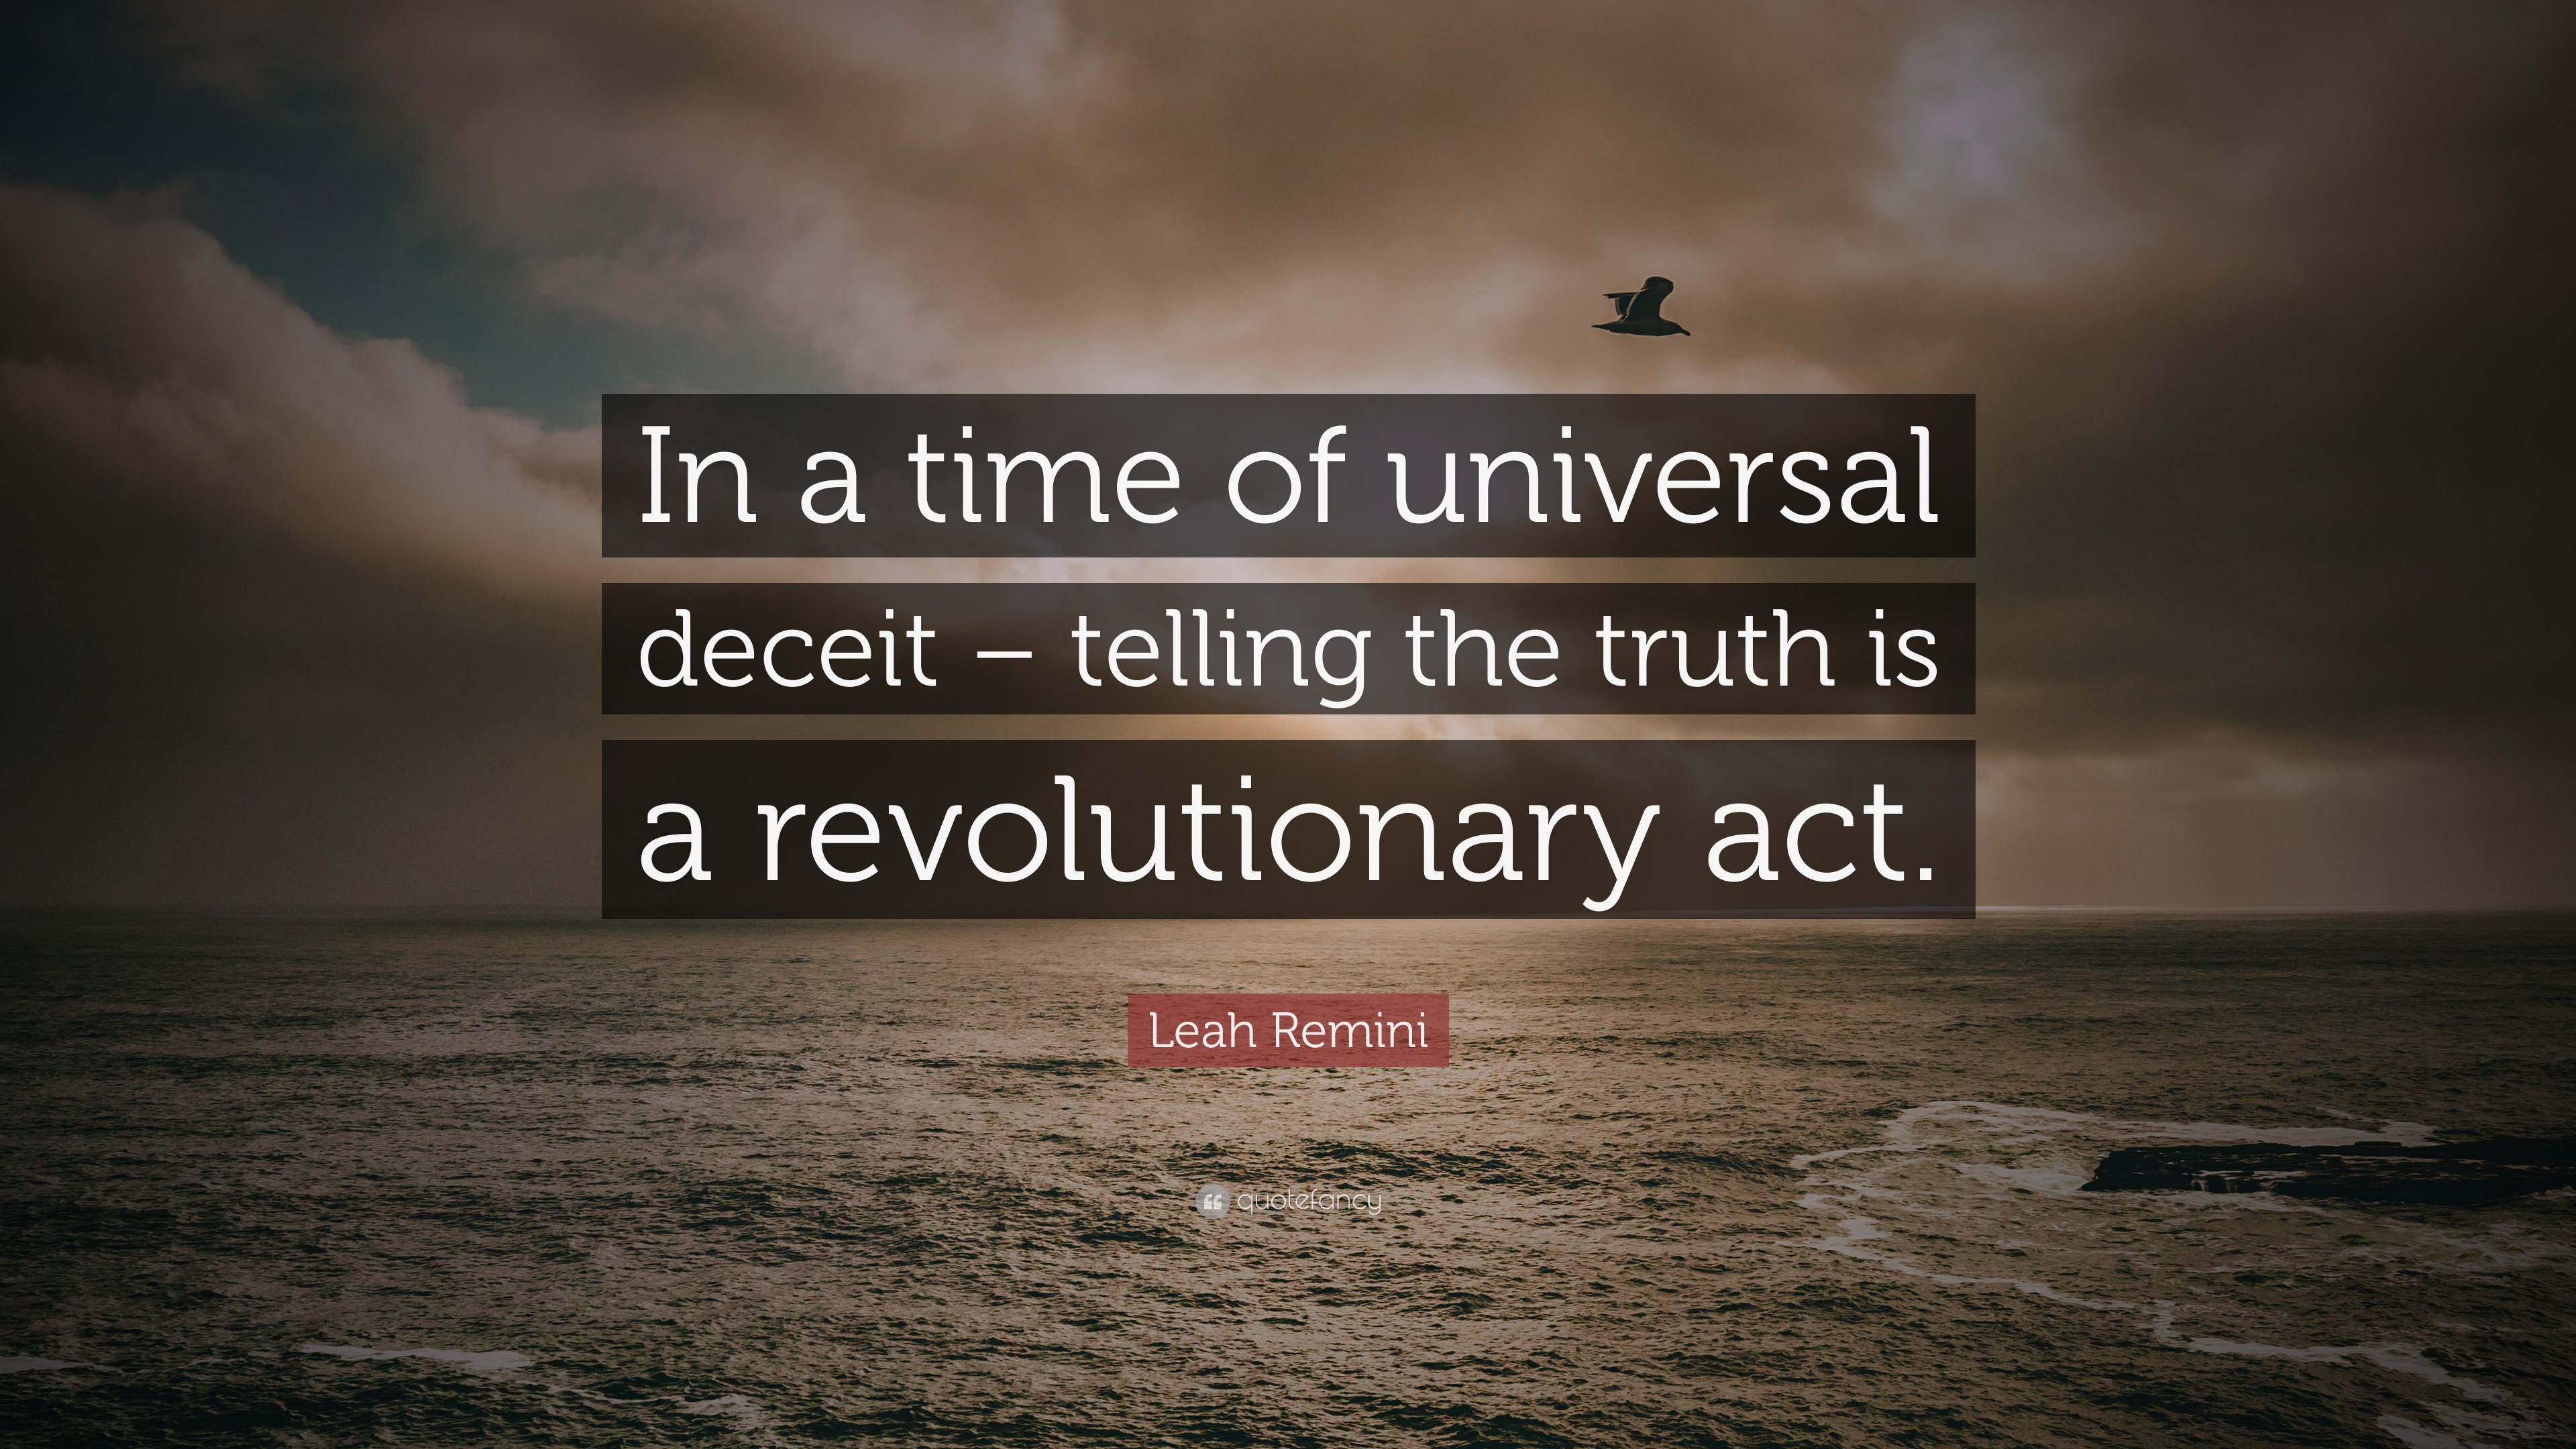 Leah Remini Quote: “In a time of universal deceit – telling the truth ...